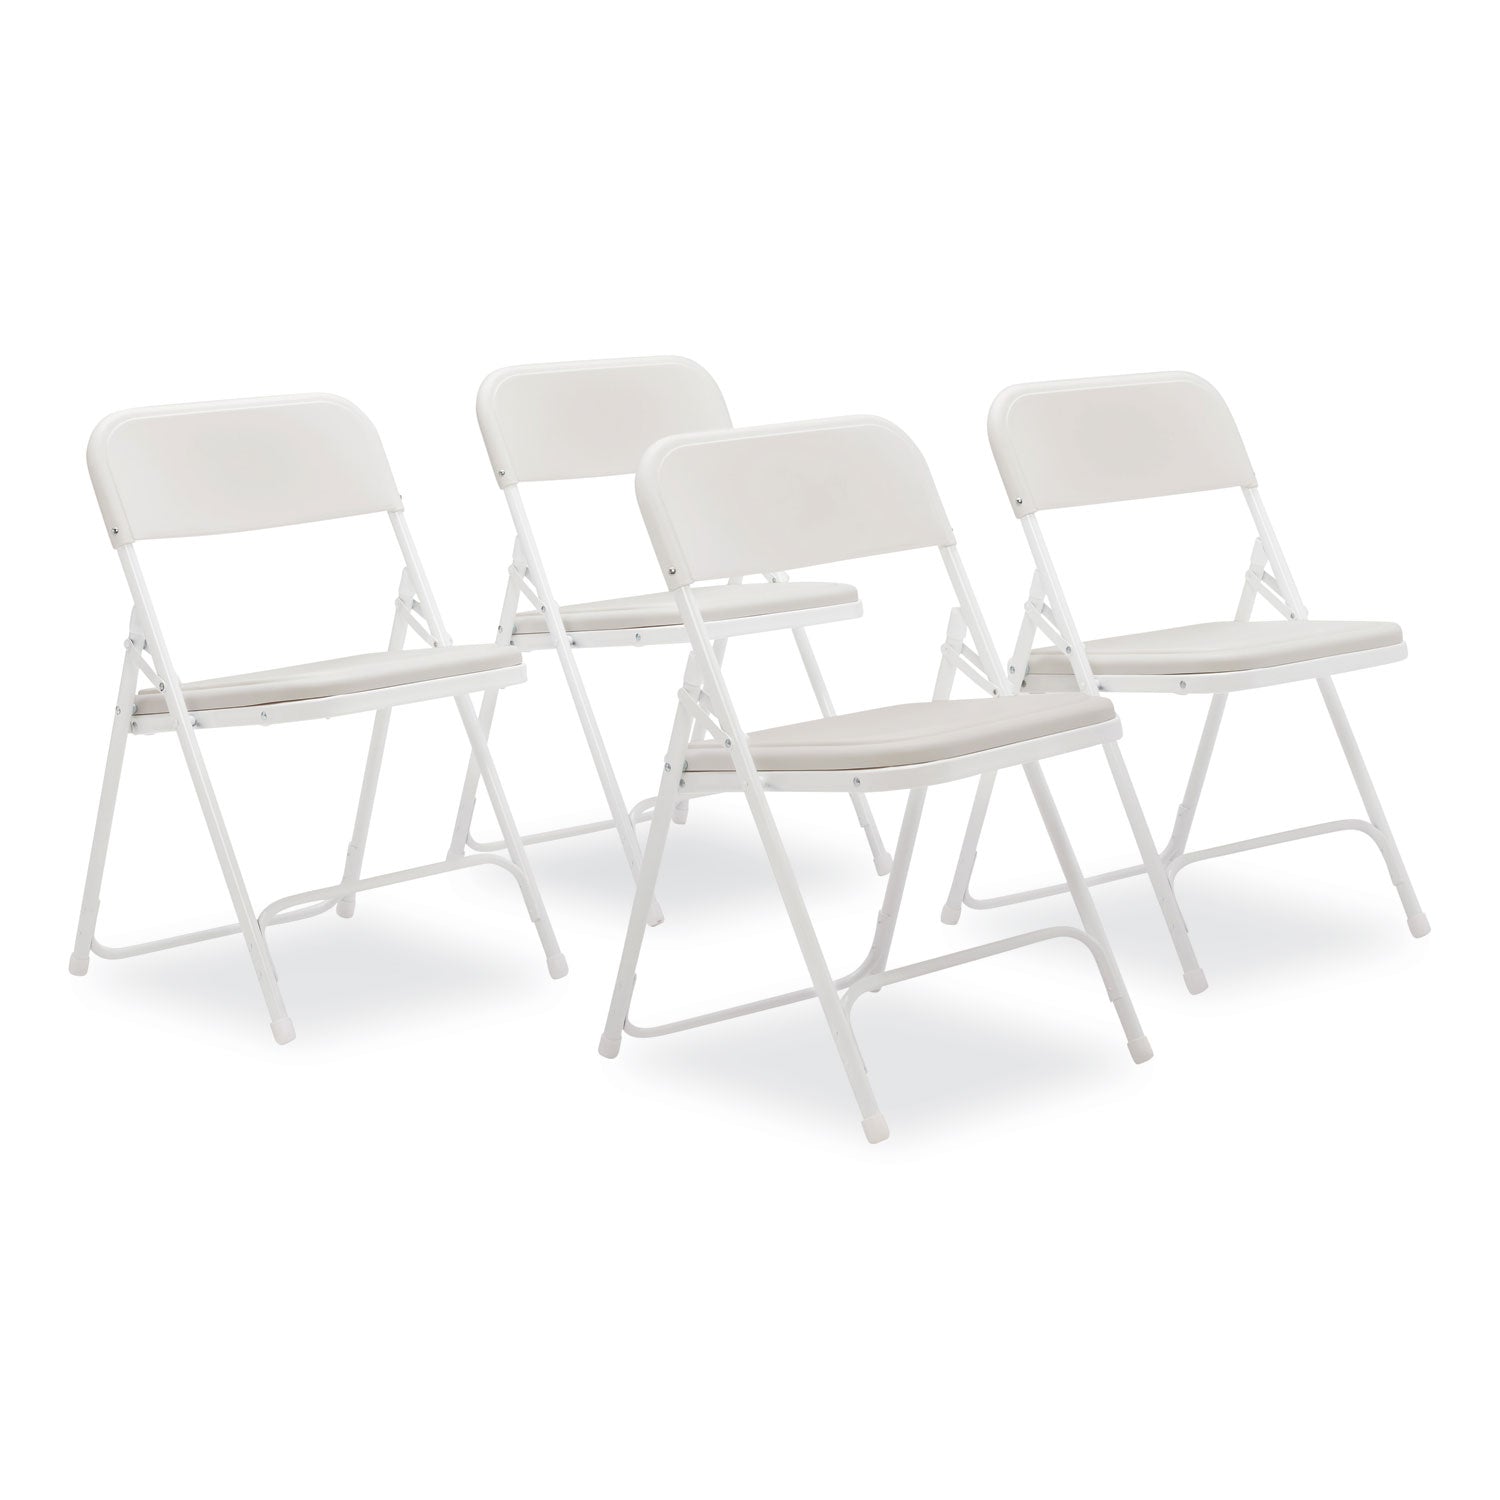 800-series-plastic-folding-chair-supports-500-lb-18-seat-ht-bright-white-seat-white-base-4-ct-ships-in-1-3-bus-days_nps821 - 1